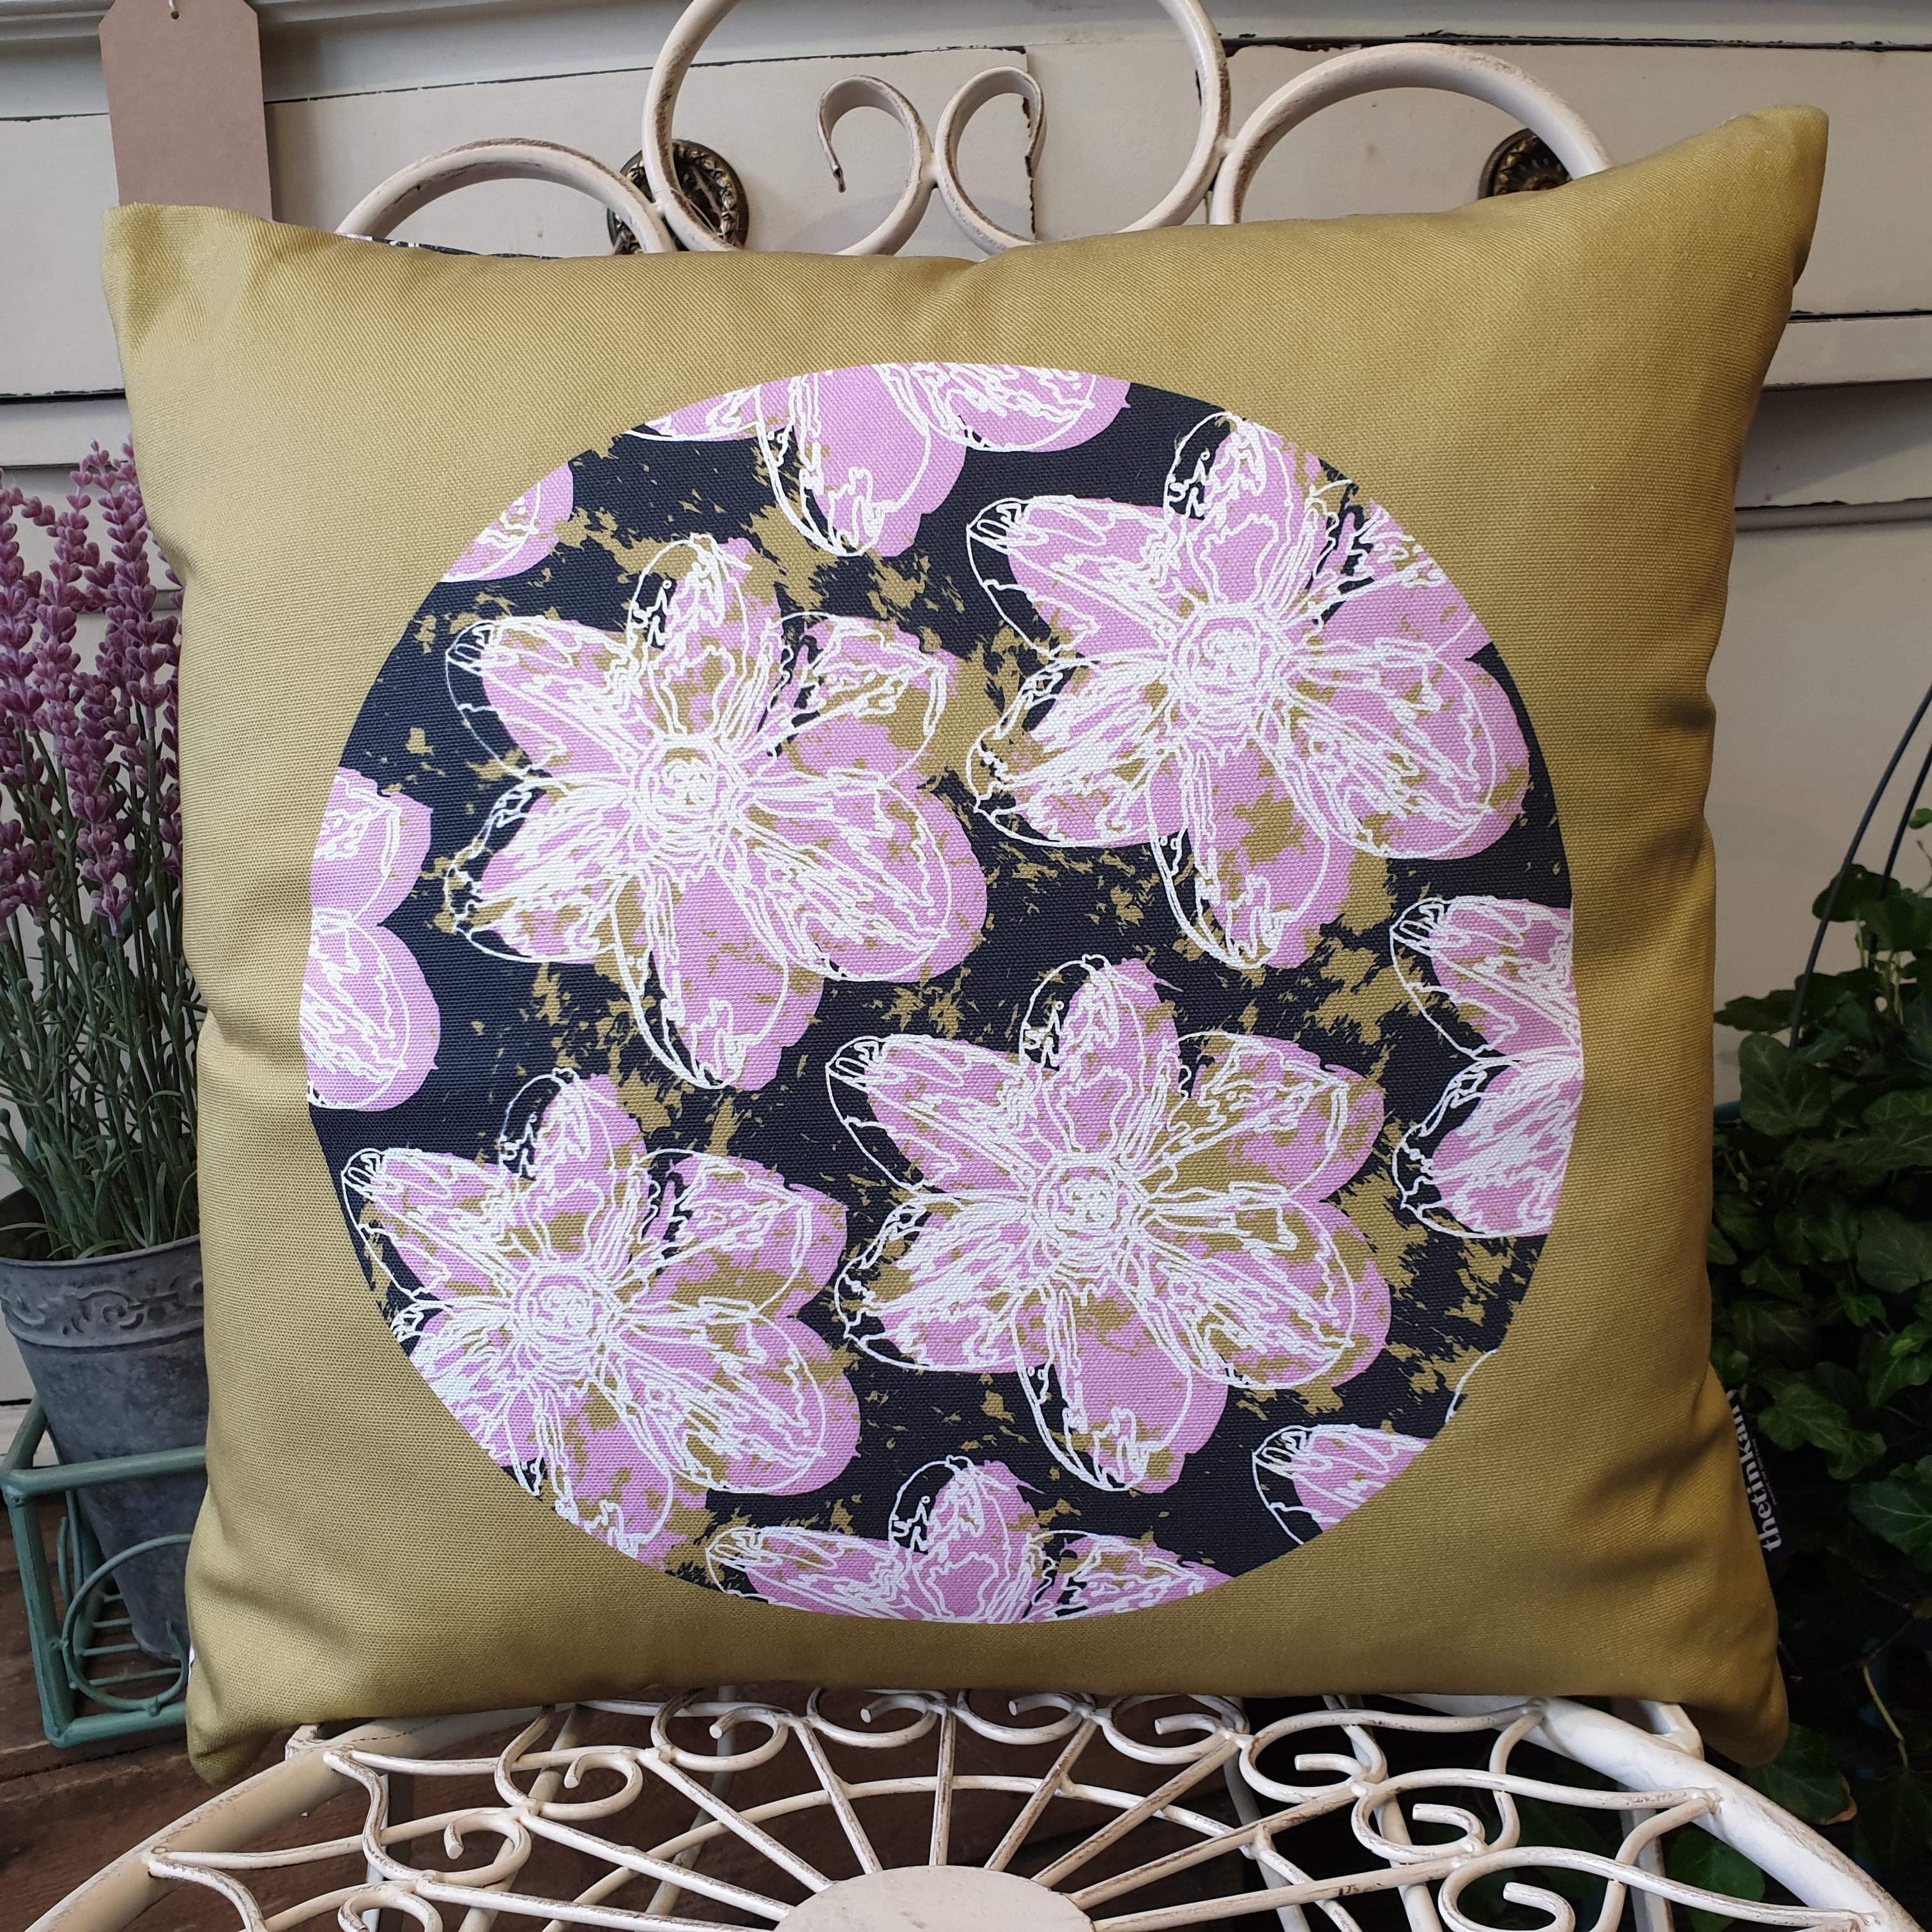 Double-sided 45cm square Flower Splash cushion designed by thetinkan. Candy pink narcissus flower with white traced outline set in a dark charcoal grey coloured circle with olive paint splashes and olive green surround. Available with an optional luxury cushion inner pad. VIEW PRODUCT >>